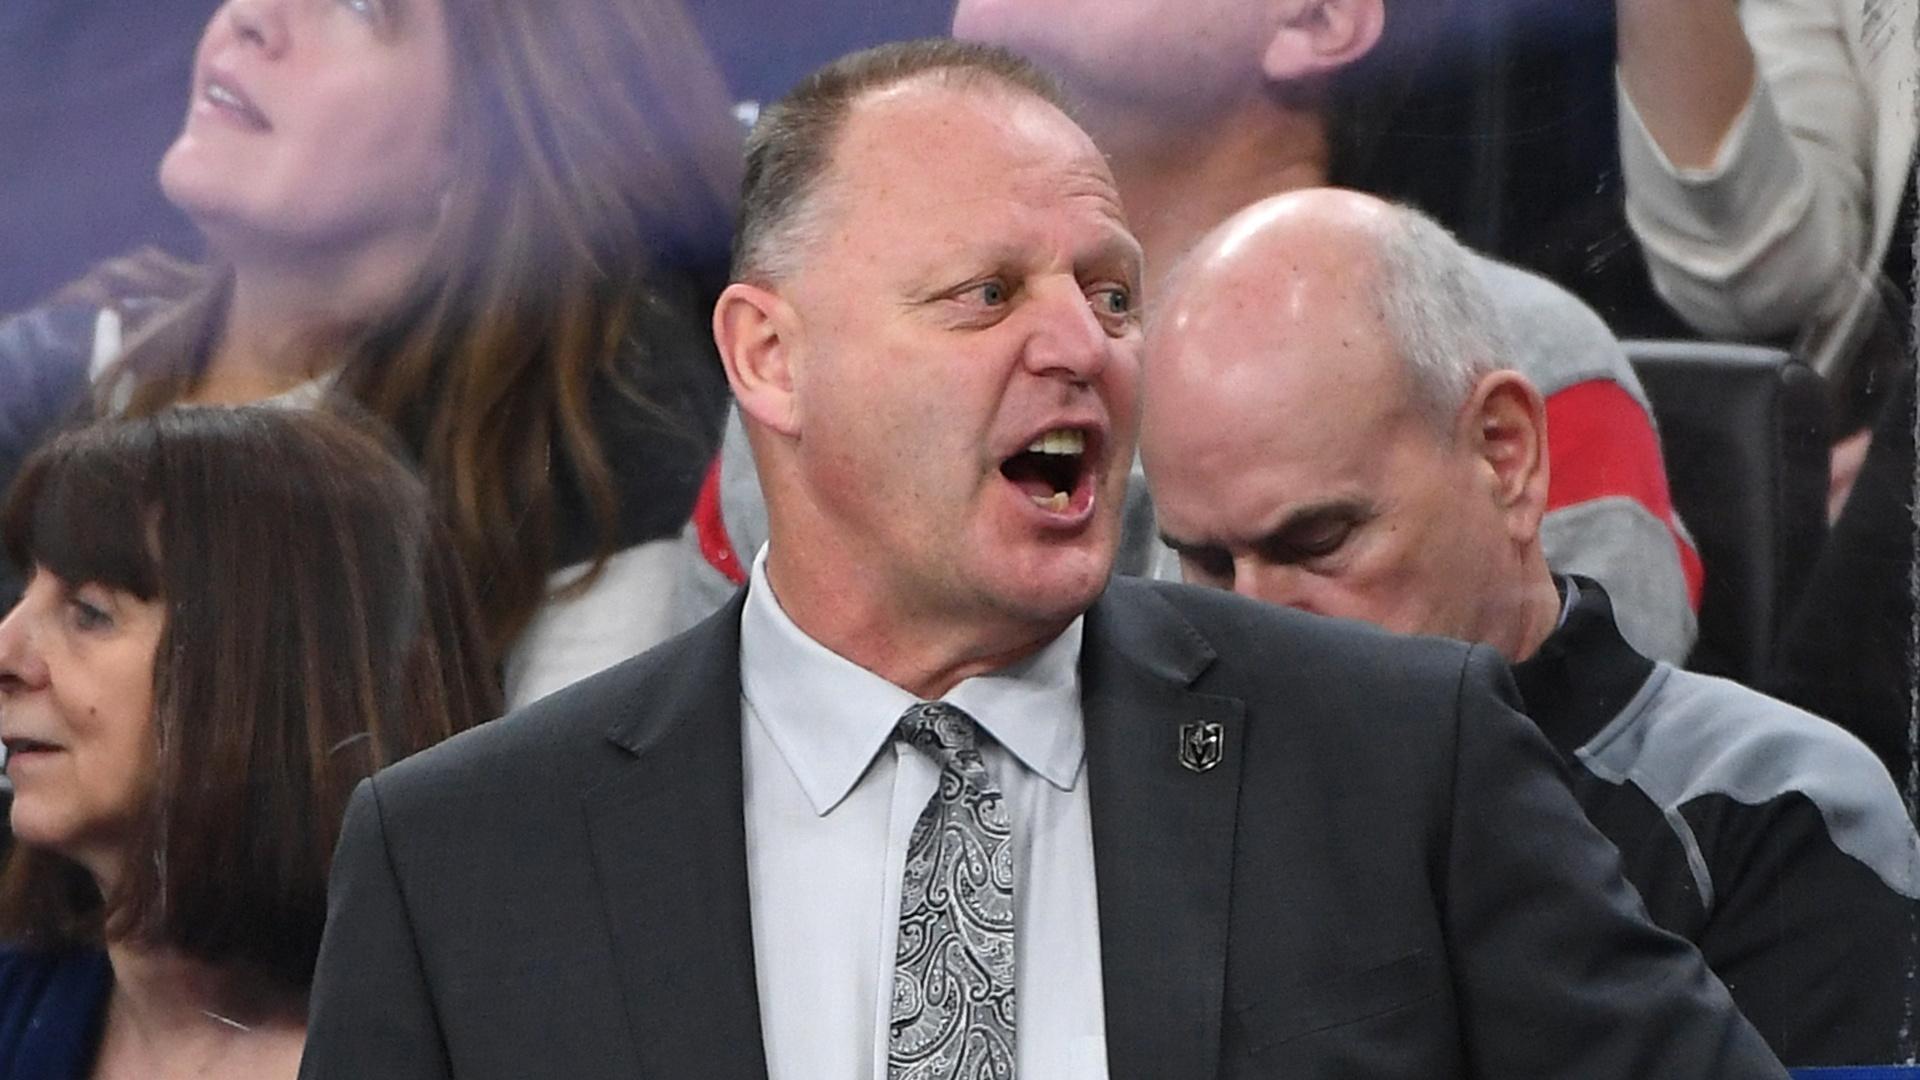 Mar 23, 2019; Las Vegas, NV, USA; Vegas Golden Knights head coach Gerard Gallant is pictured during the third period against the Detroit Red Wings at T-Mobile Arena. / © Stephen R. Sylvanie-USA TODAY Sports